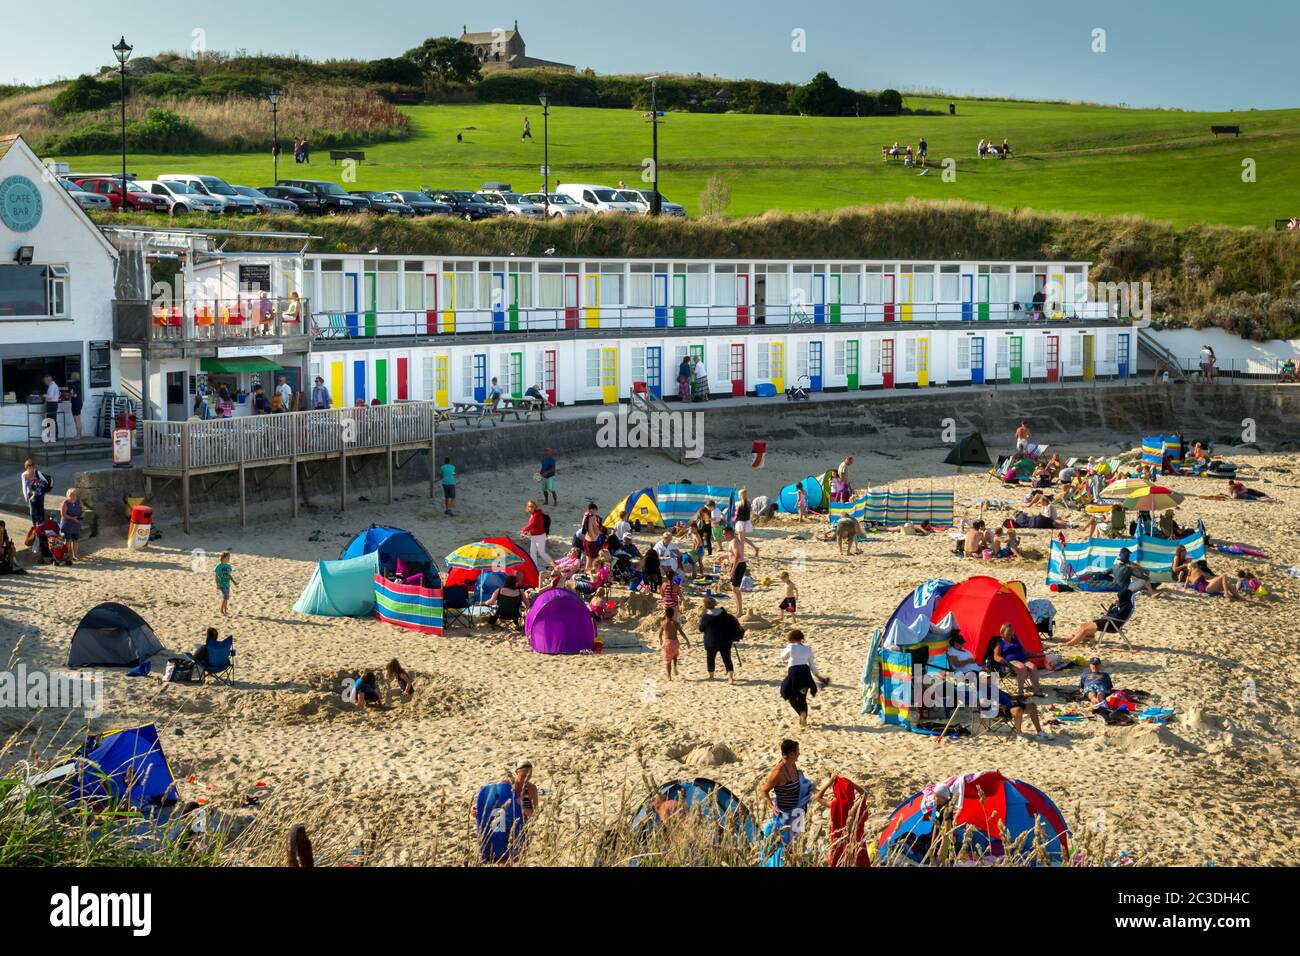 St. Ives - Cornwall - United Kingdom - 27 August 2013. Porthgwidden very colourful beach chalets, St. Ives Stock Photo